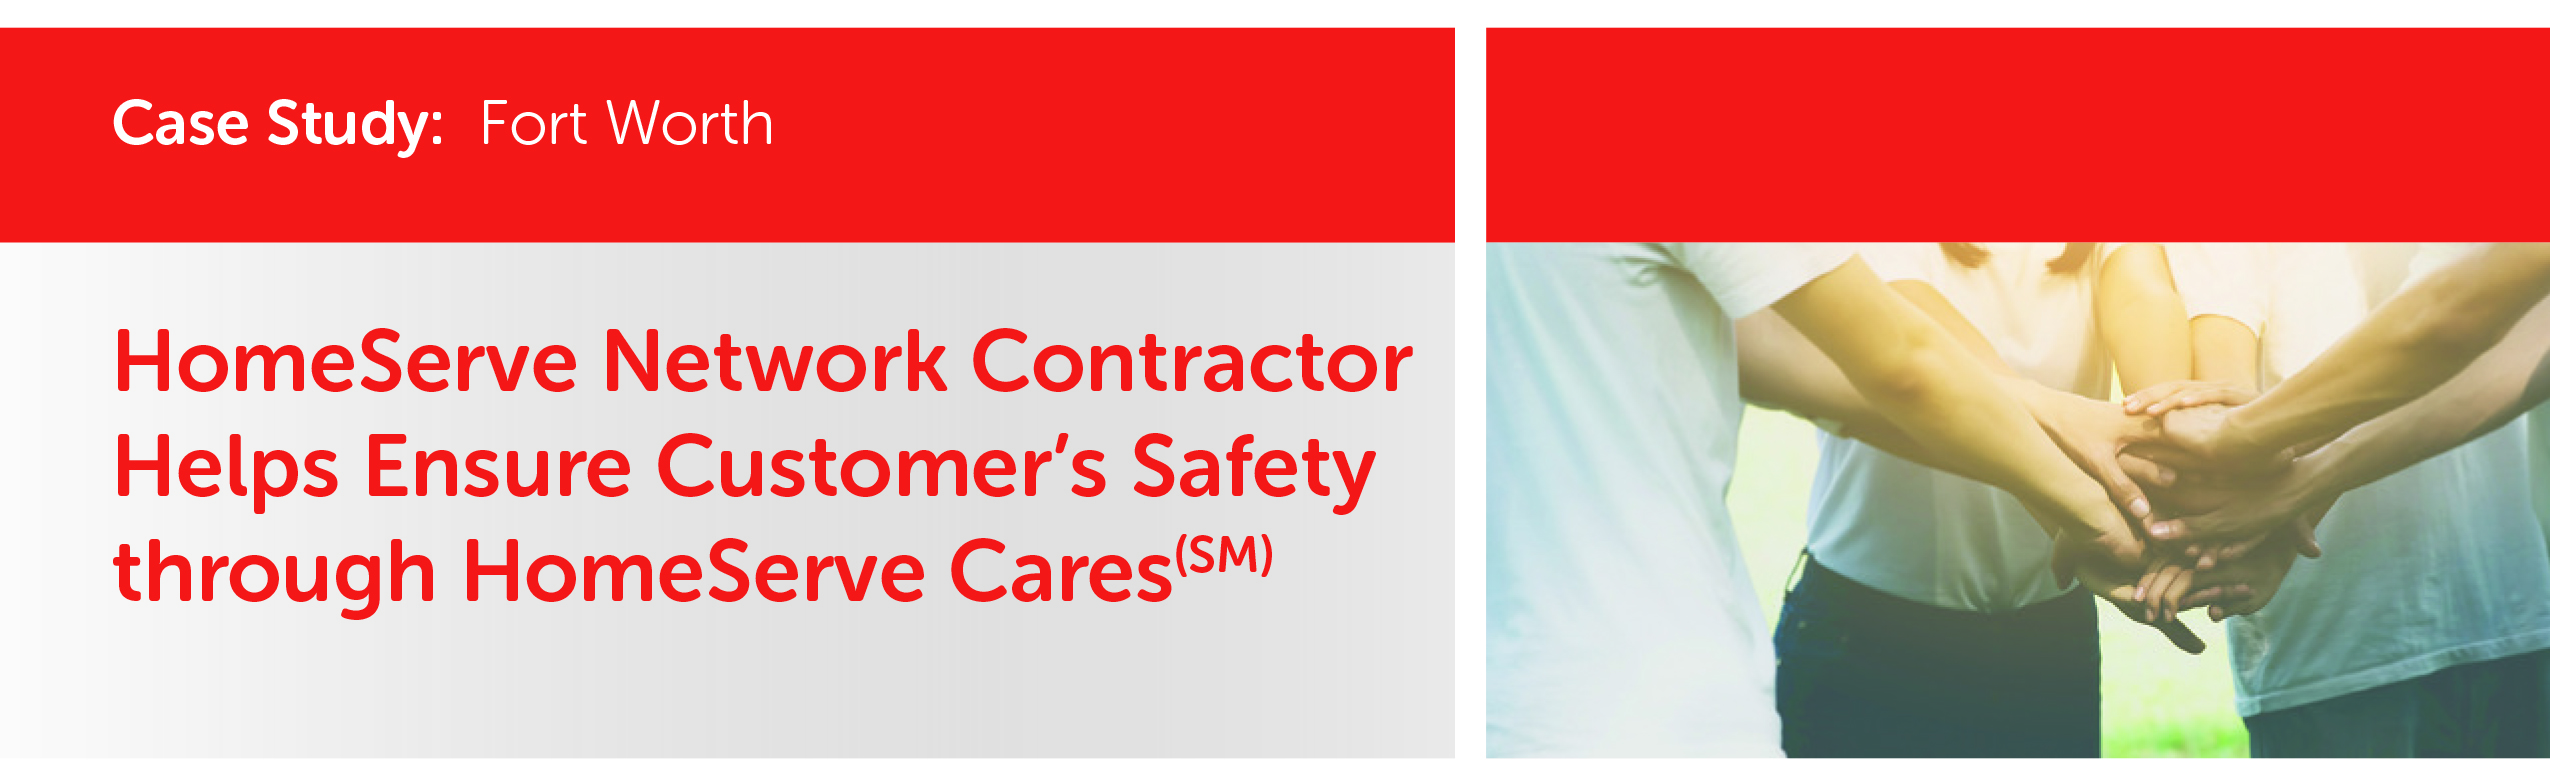 HomeServe Network Contractor Helps Ensure Customer’s Safety through HomeServe Cares